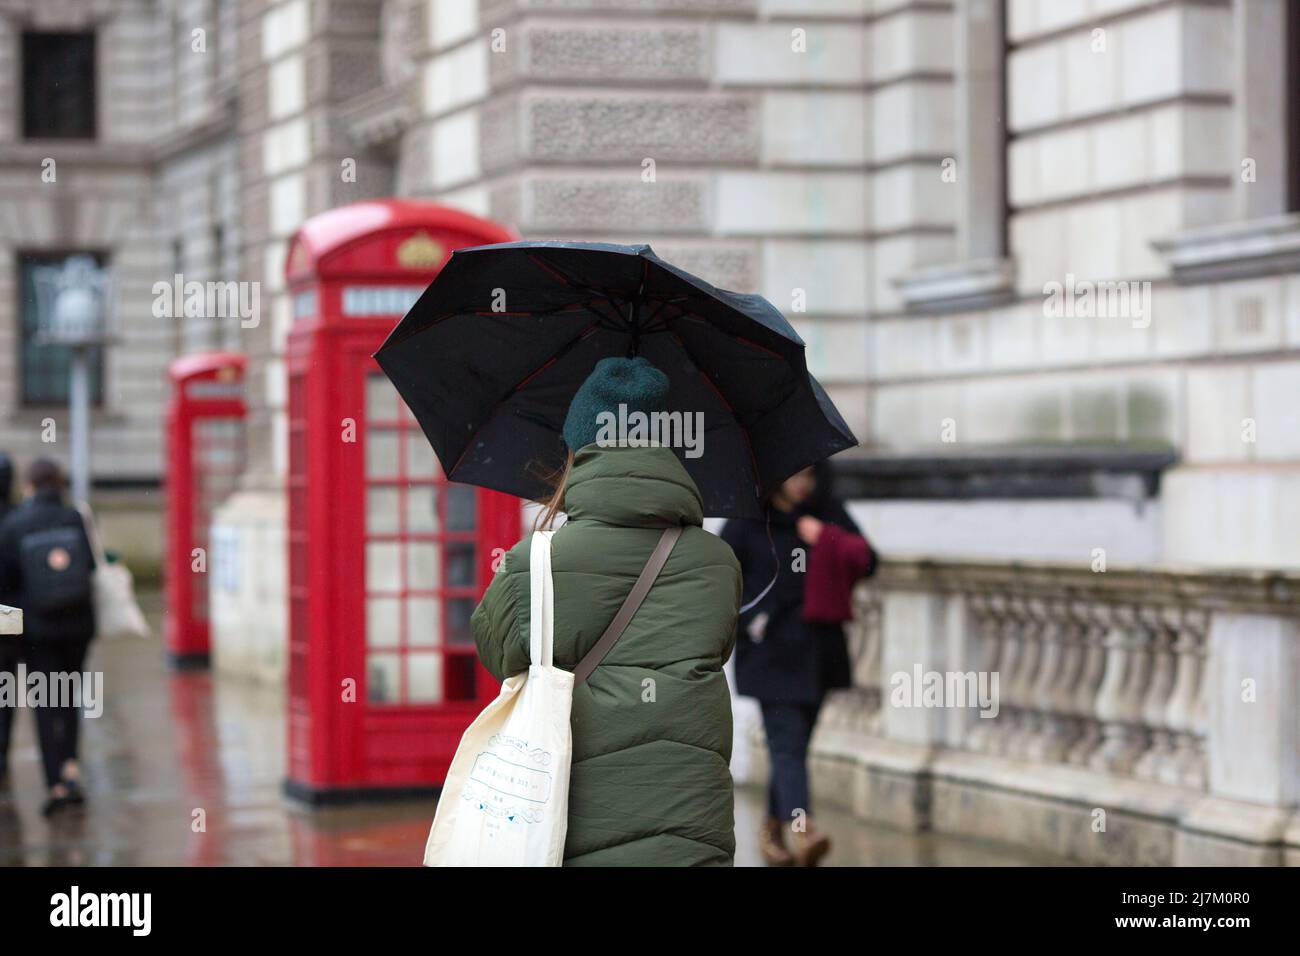 The umbrellas held by a pedestrian is seen blown by the wind in Westminster, central London. Stock Photo